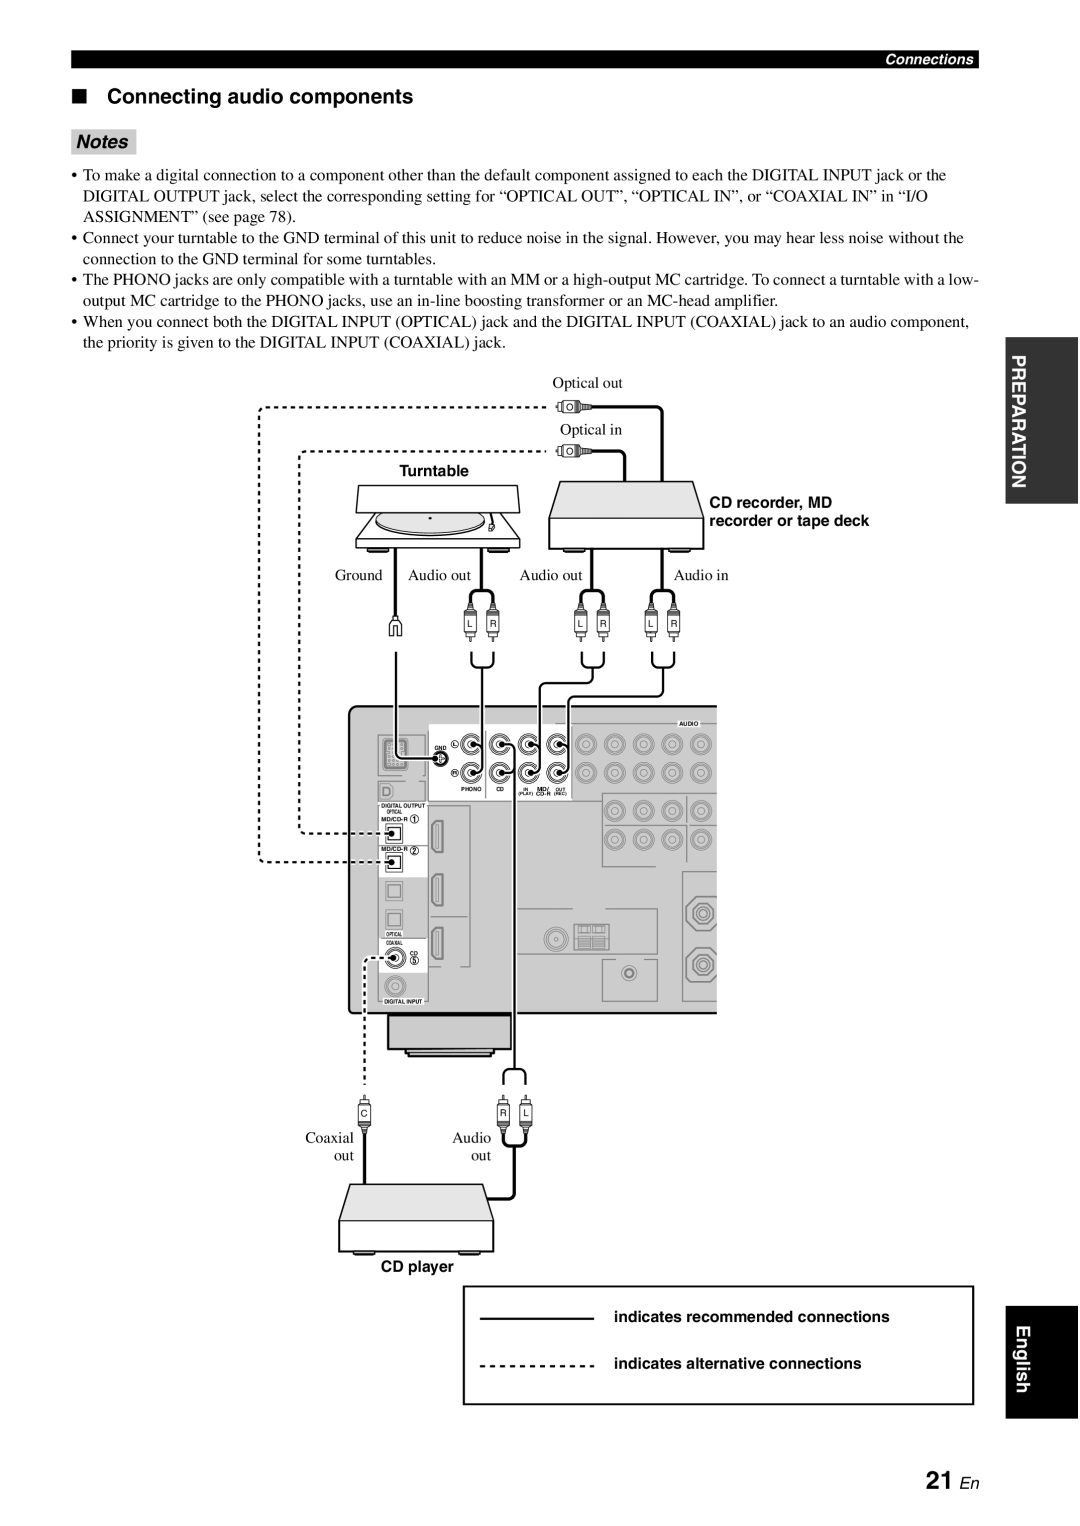 Yamaha HTR-6080 owner manual 21 En, Connecting audio components, Notes 